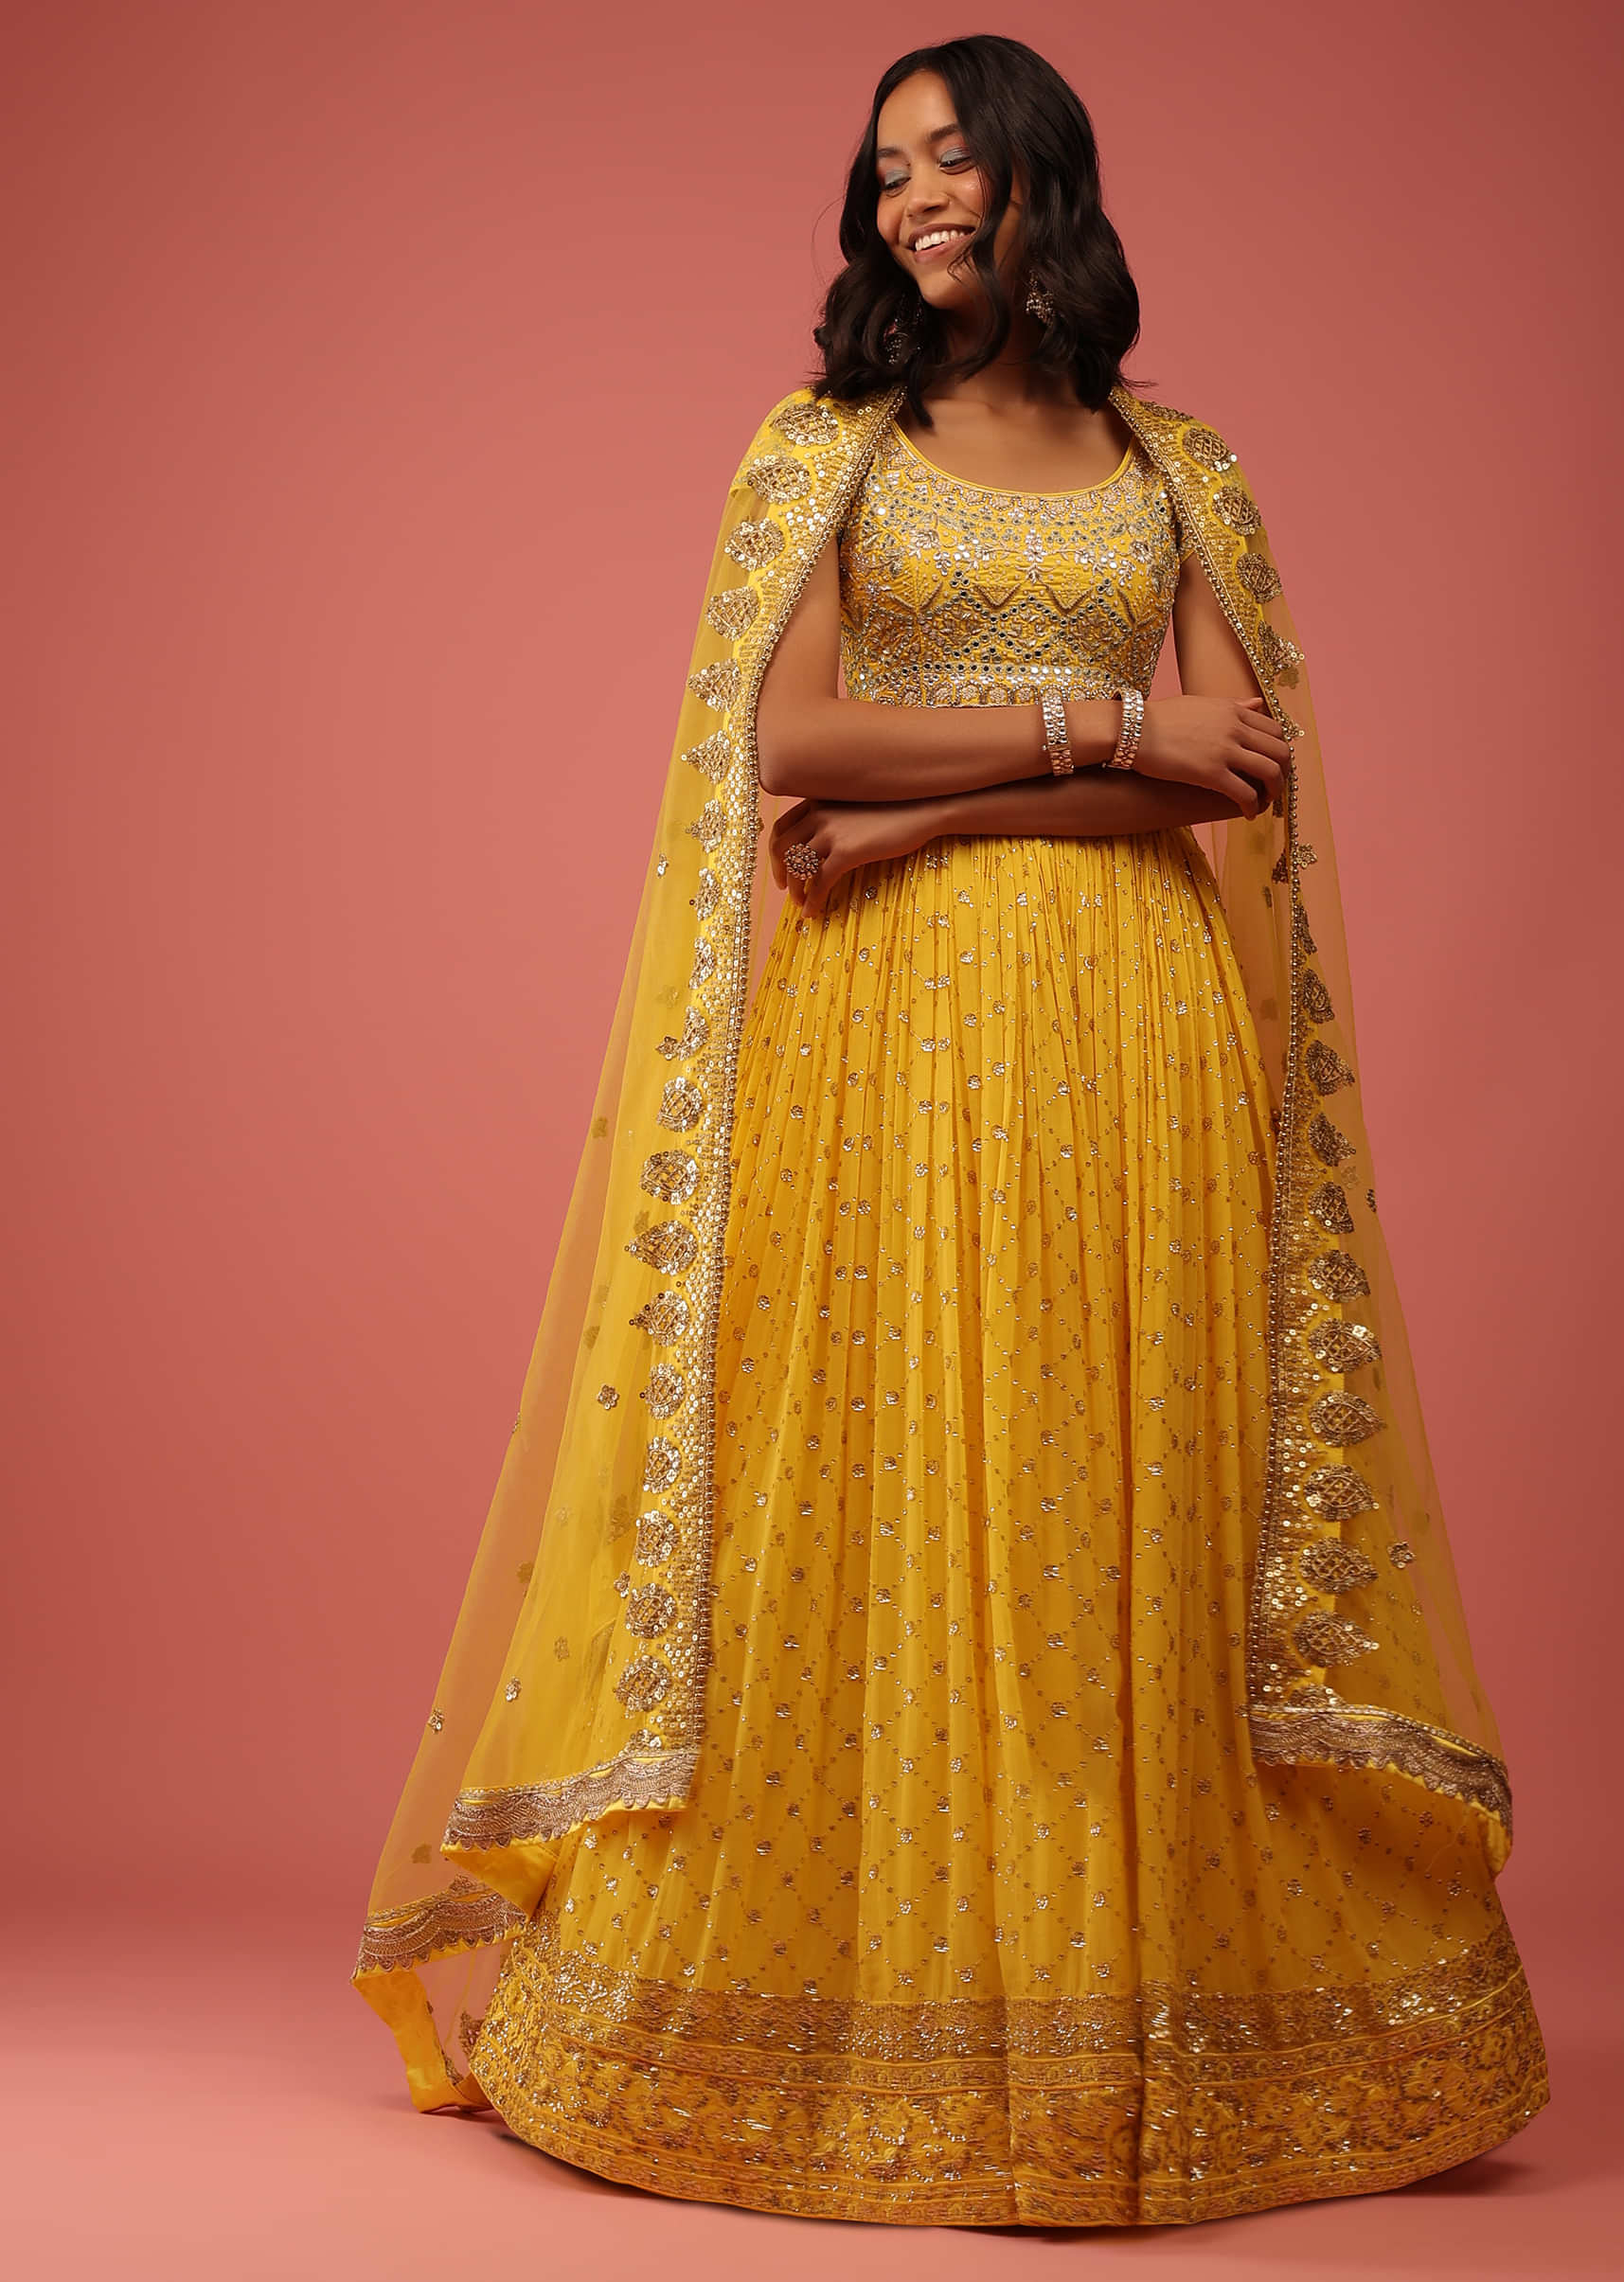 Daffodil Yellow Lehenga Choli With Sequins Embroidered Mesh Jaal And Floral Details